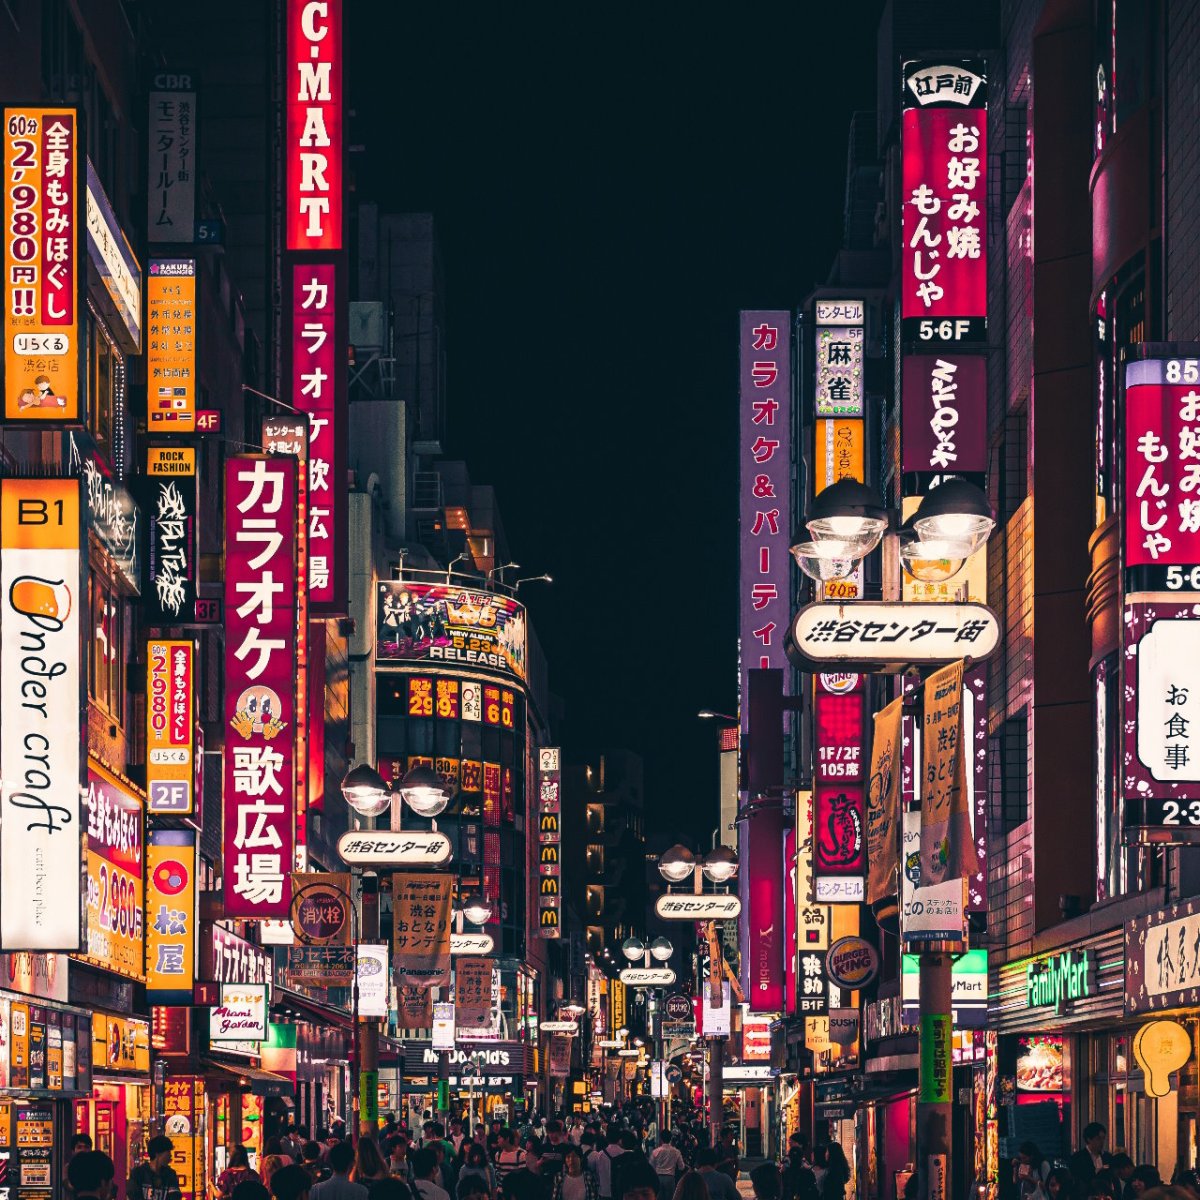 The 9 Best Books for Japanophiles